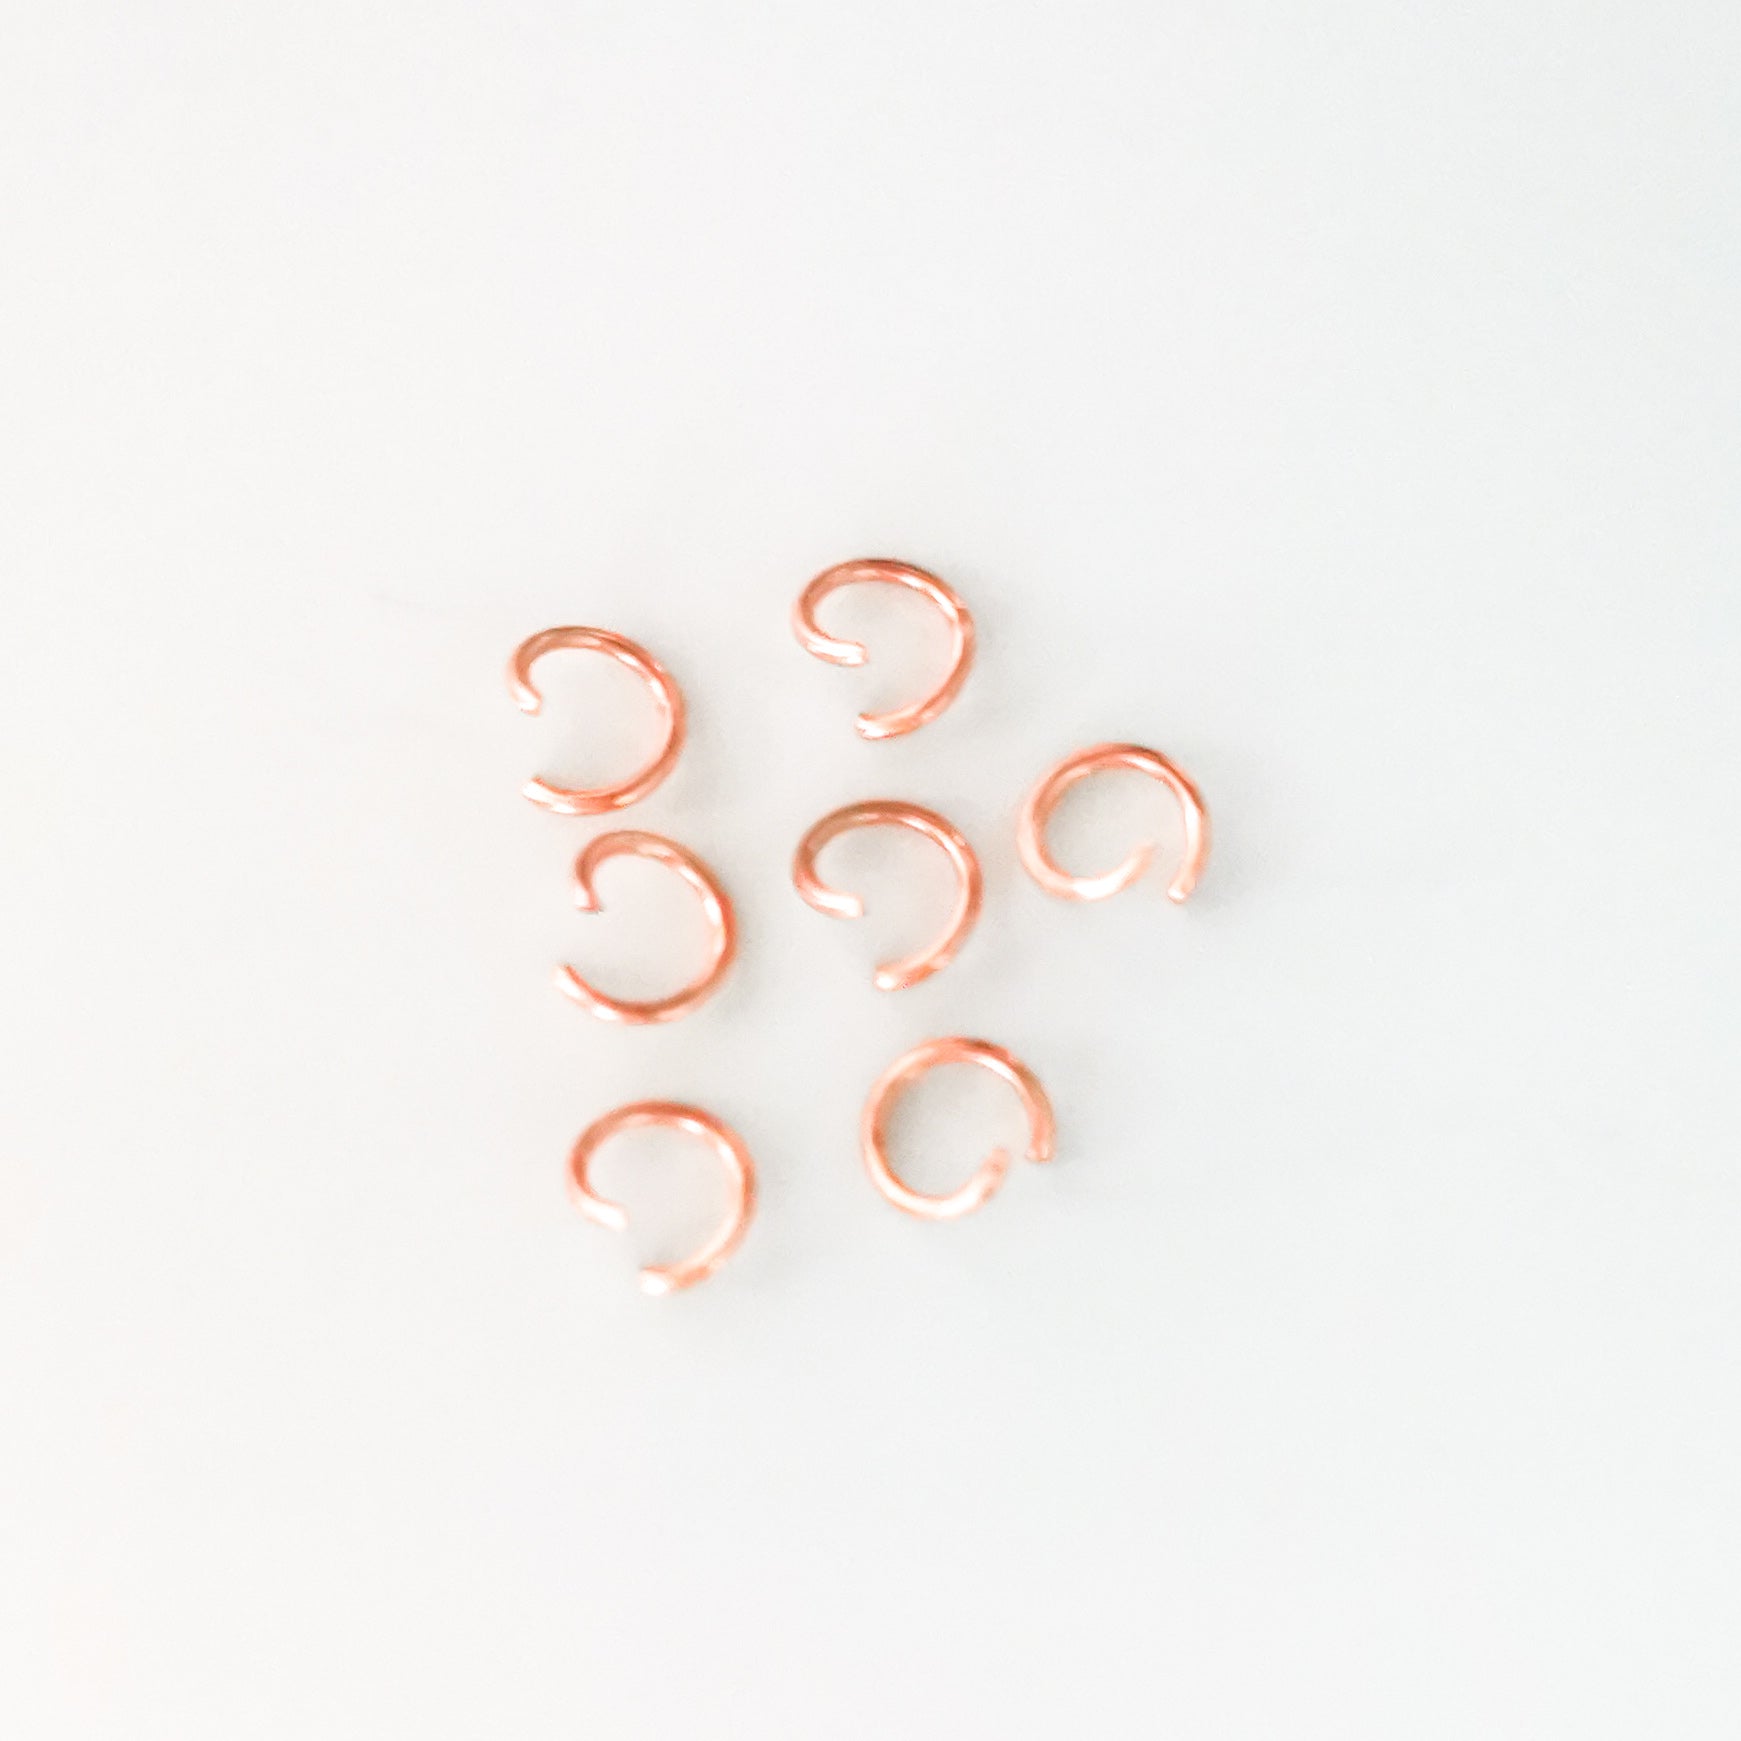 8mm Rose Gold Stainless Steel Jump Rings - 100 pieces